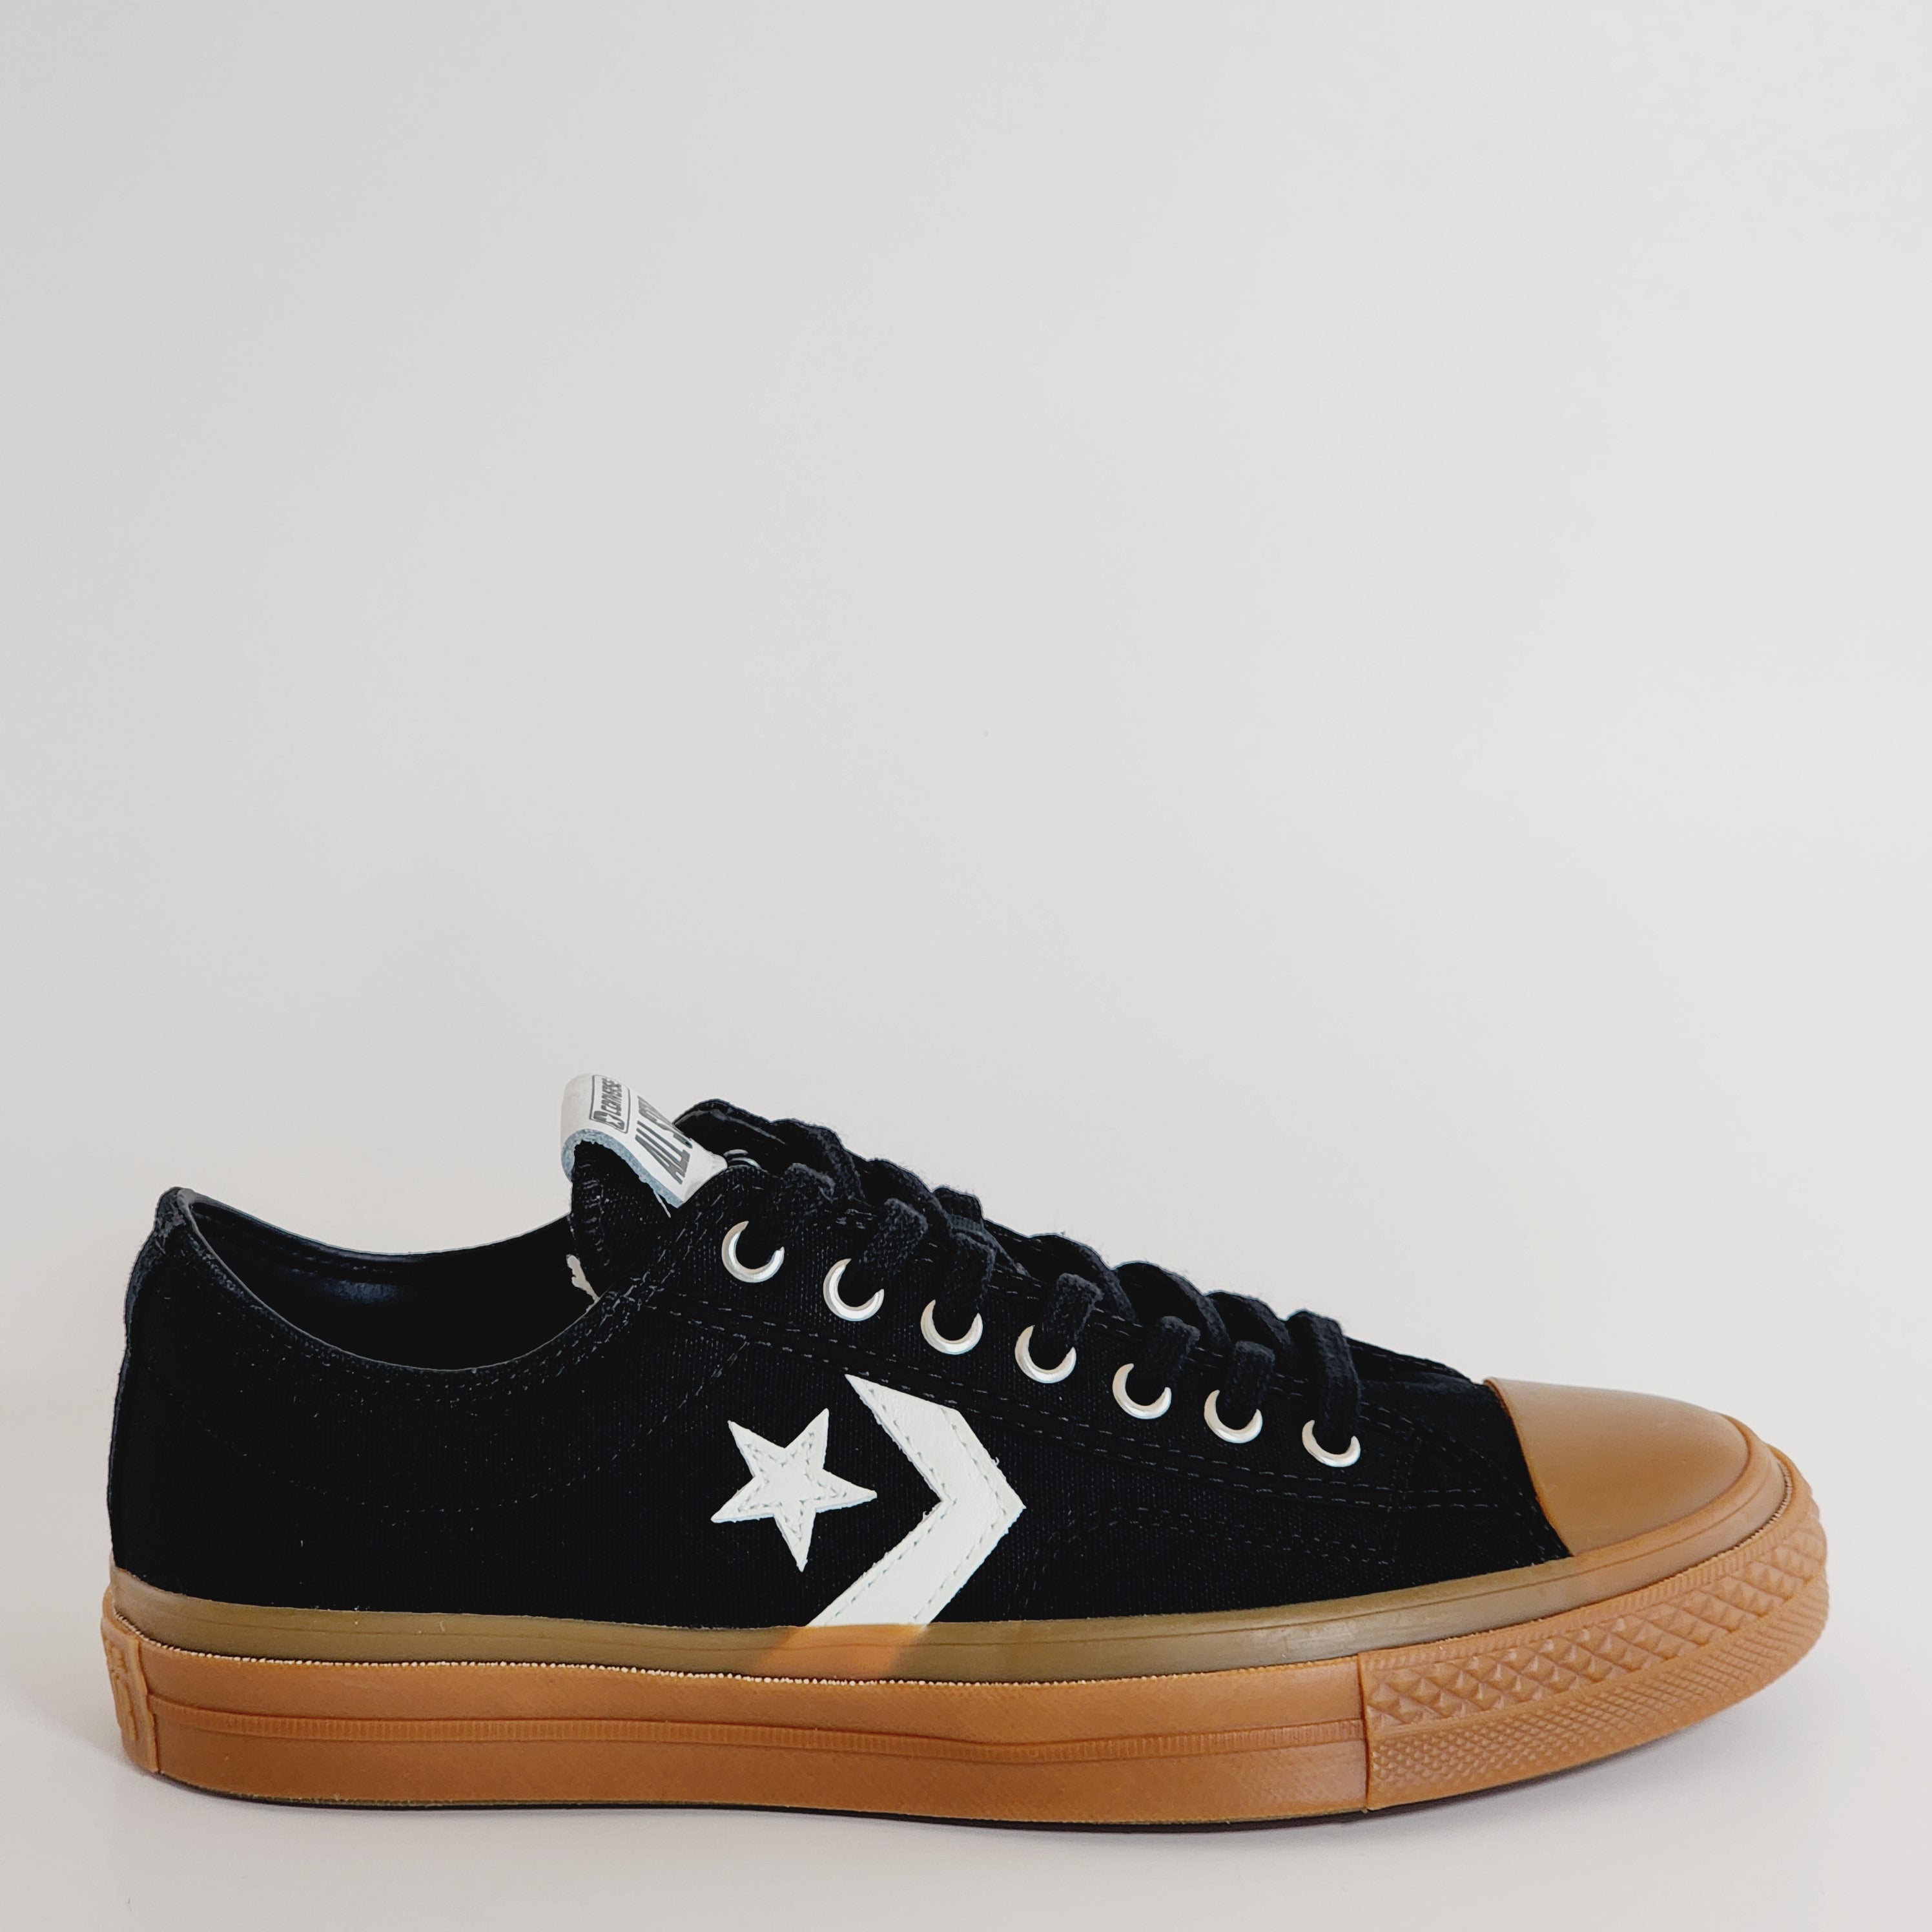 Converse Star Player 76 Low Ox Black/Vintage White/Gum Unisex Sneakers A08847C